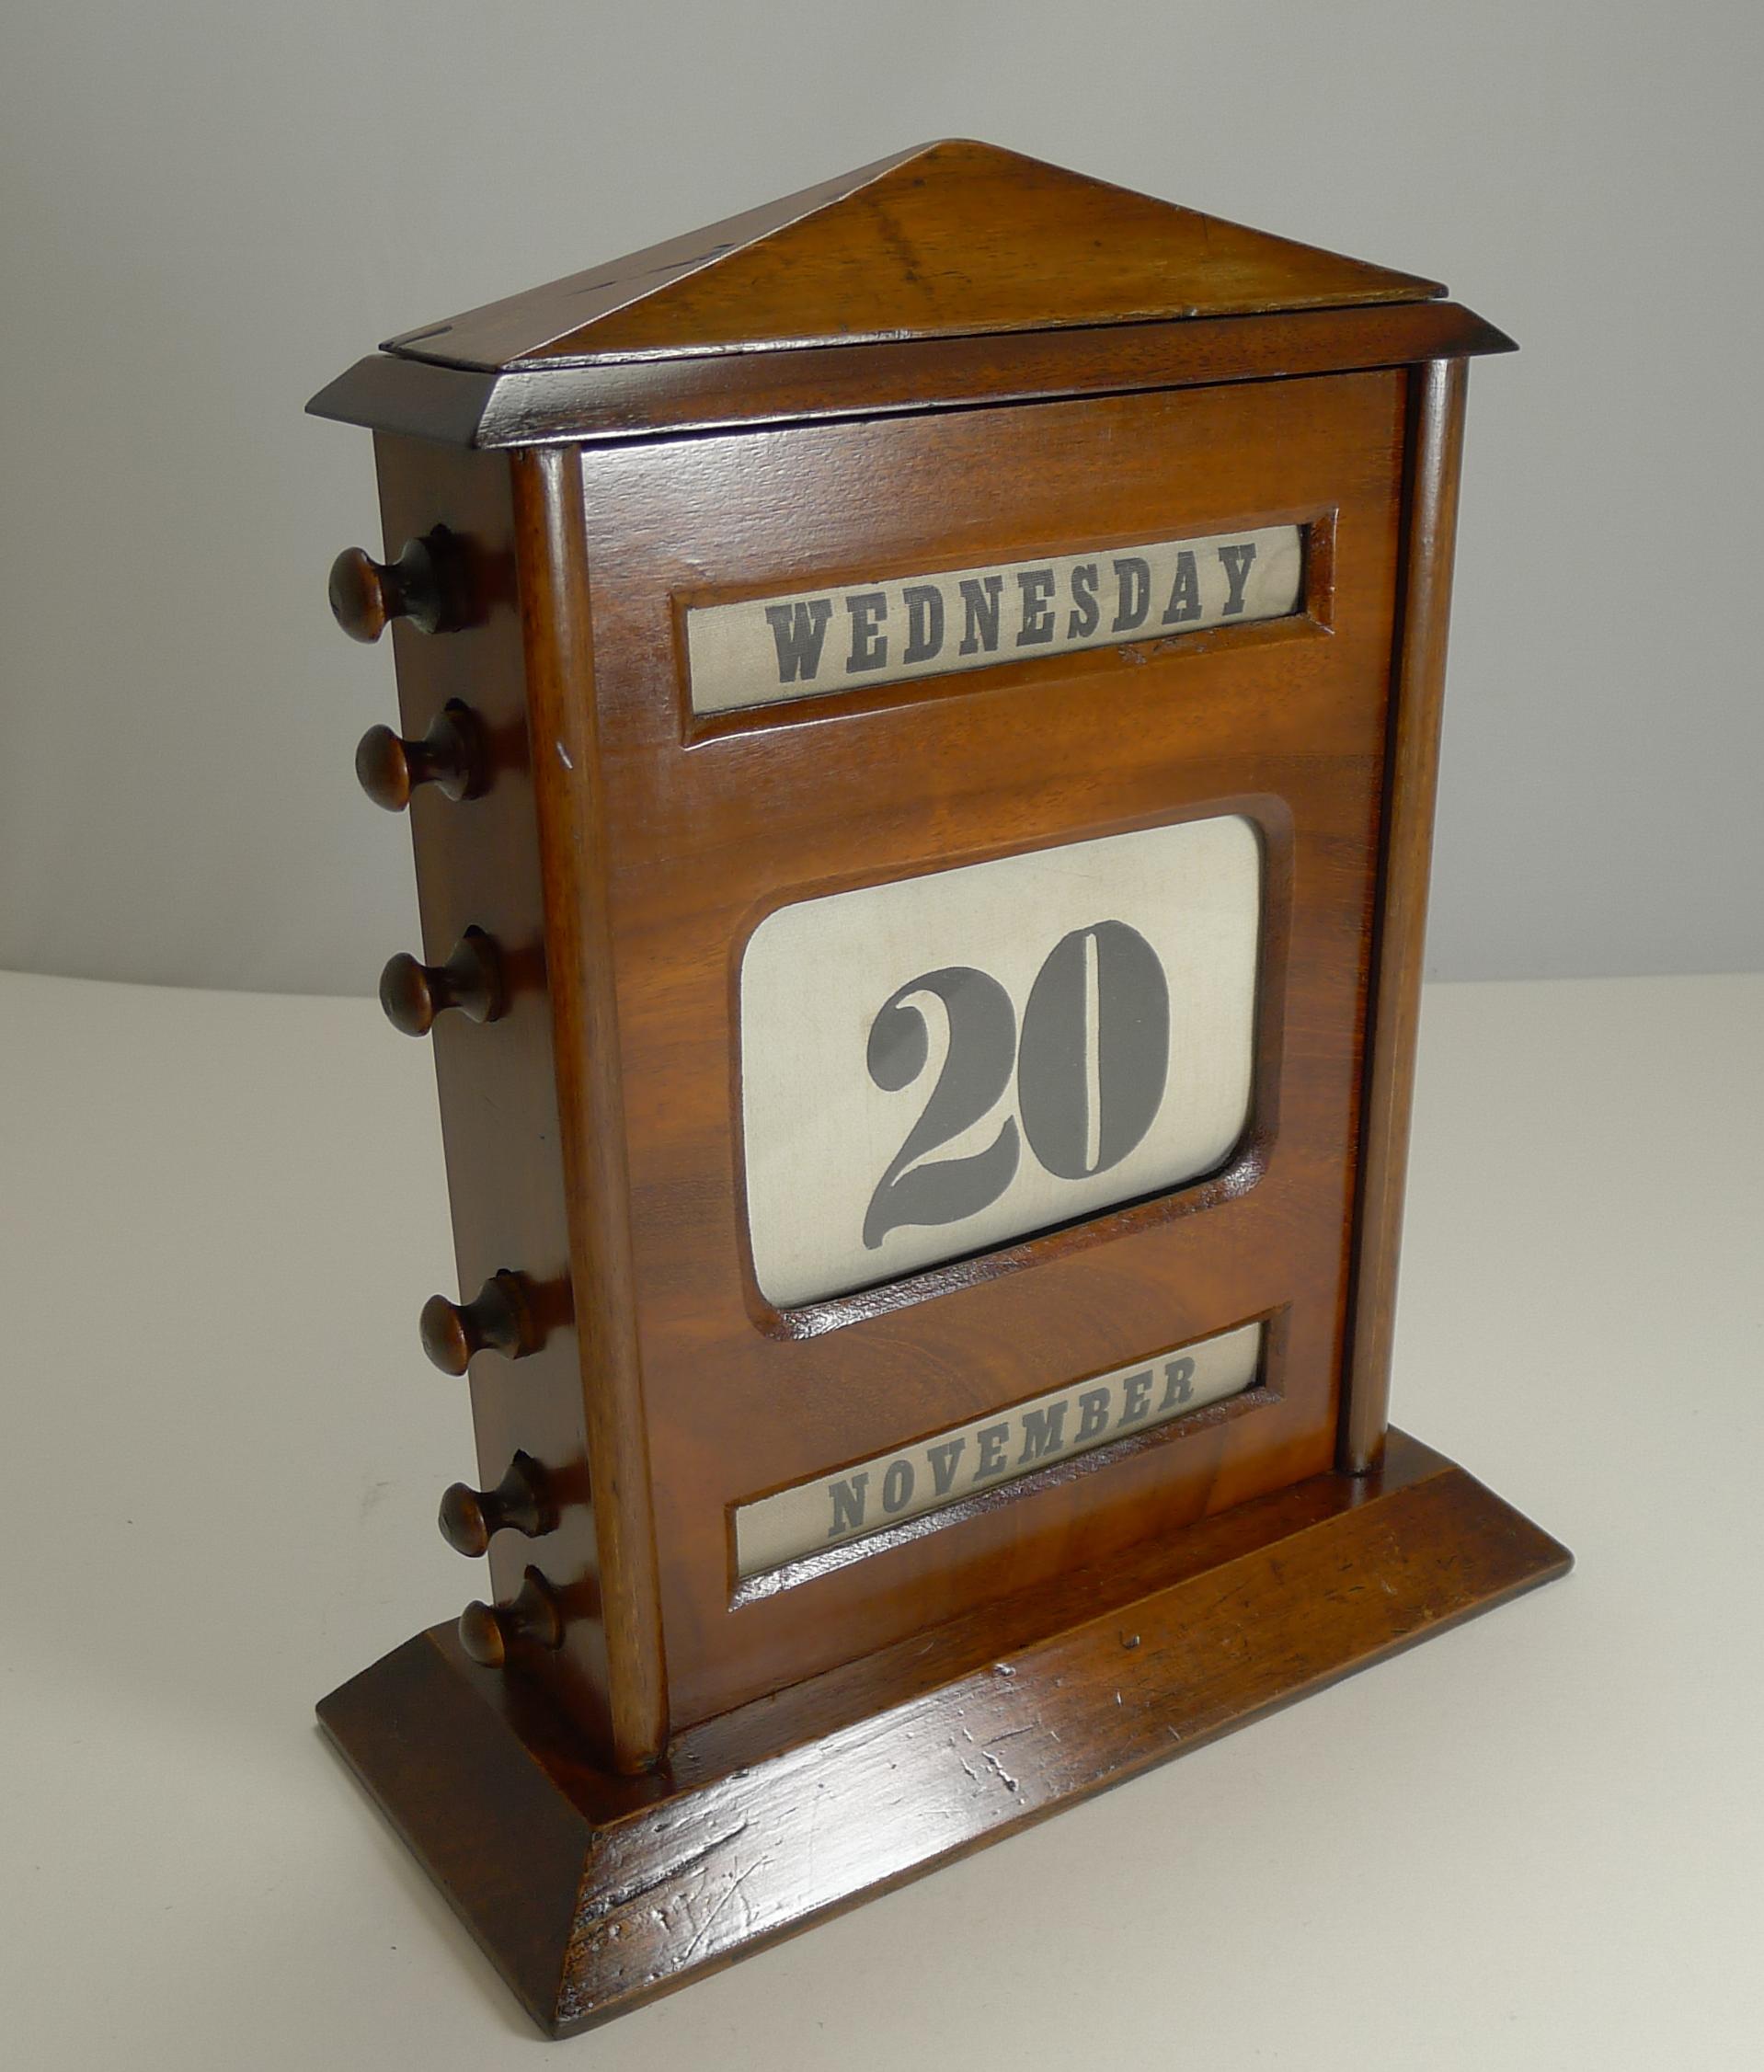 It's been some time since I have had a calendar this size and even better being in sought-after Mahogany; standing 12